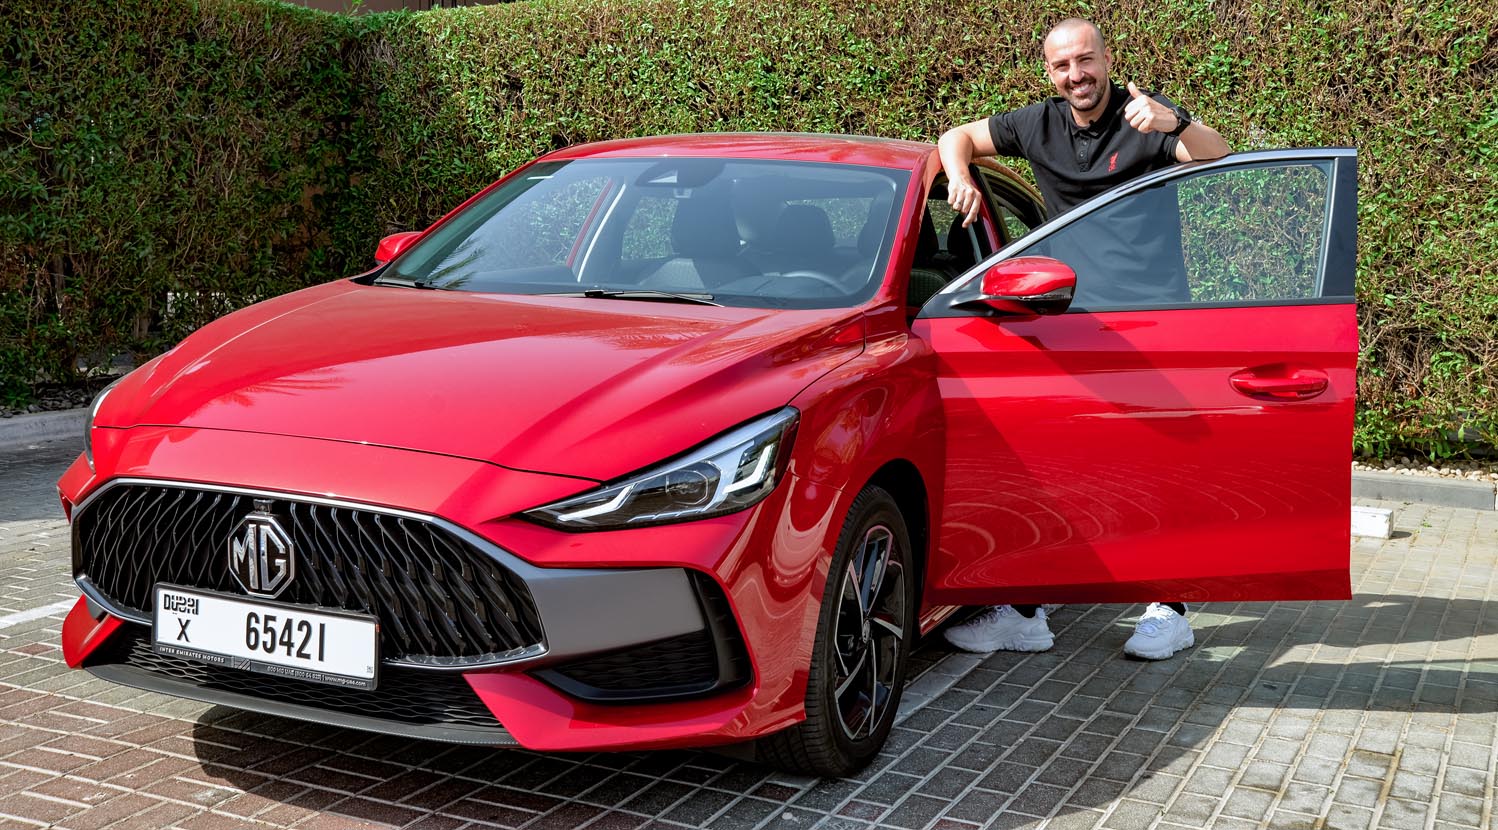 Former Liverpool F.C. Player, Jose Enrique, Poses Next To MG Motor’s Newest Star